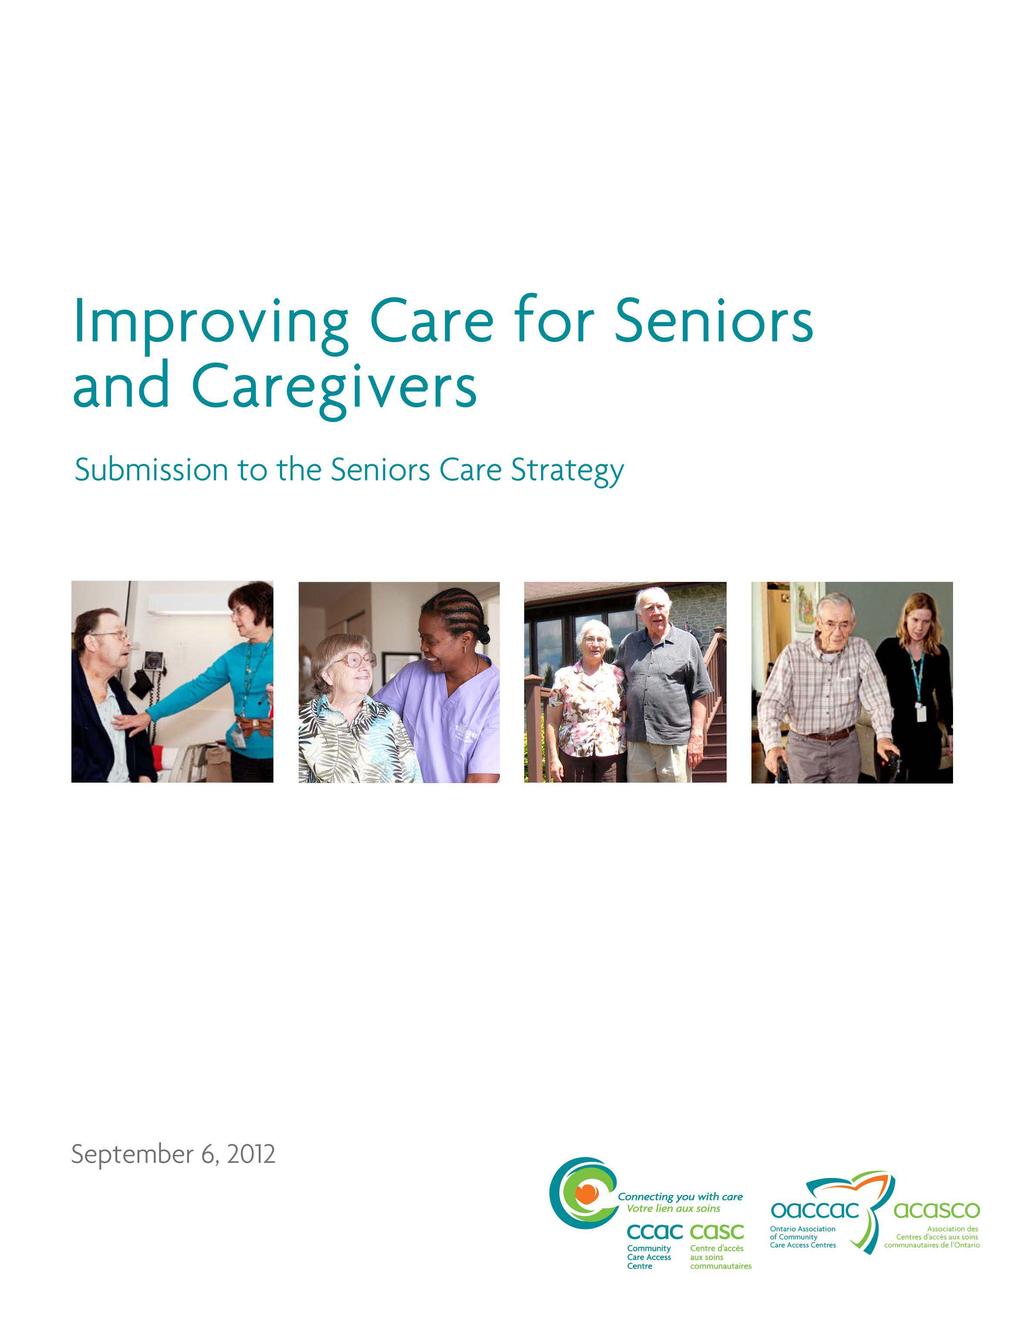 Improving Care for Seniors and Caregivers Submission to the Seniors Care Strategy September 6, 2012 Connecting you with care ~7 ""'-~~ Votre lien oux soins oacca~